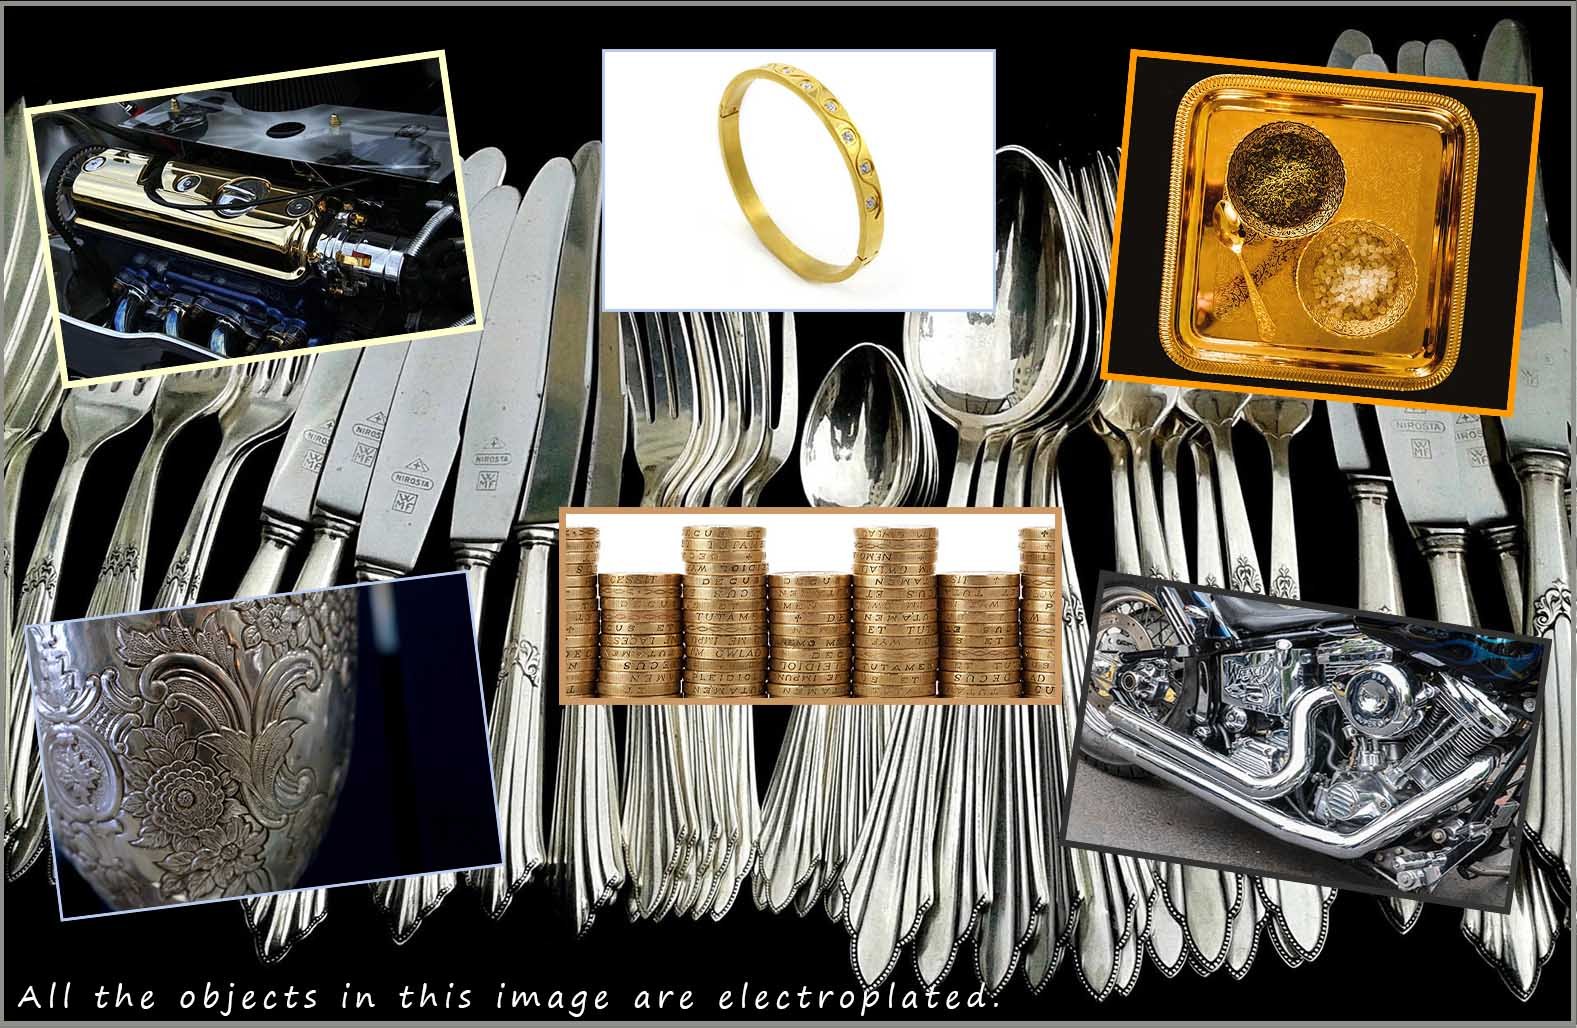 A montage of objects which are commonly electroplated. objects